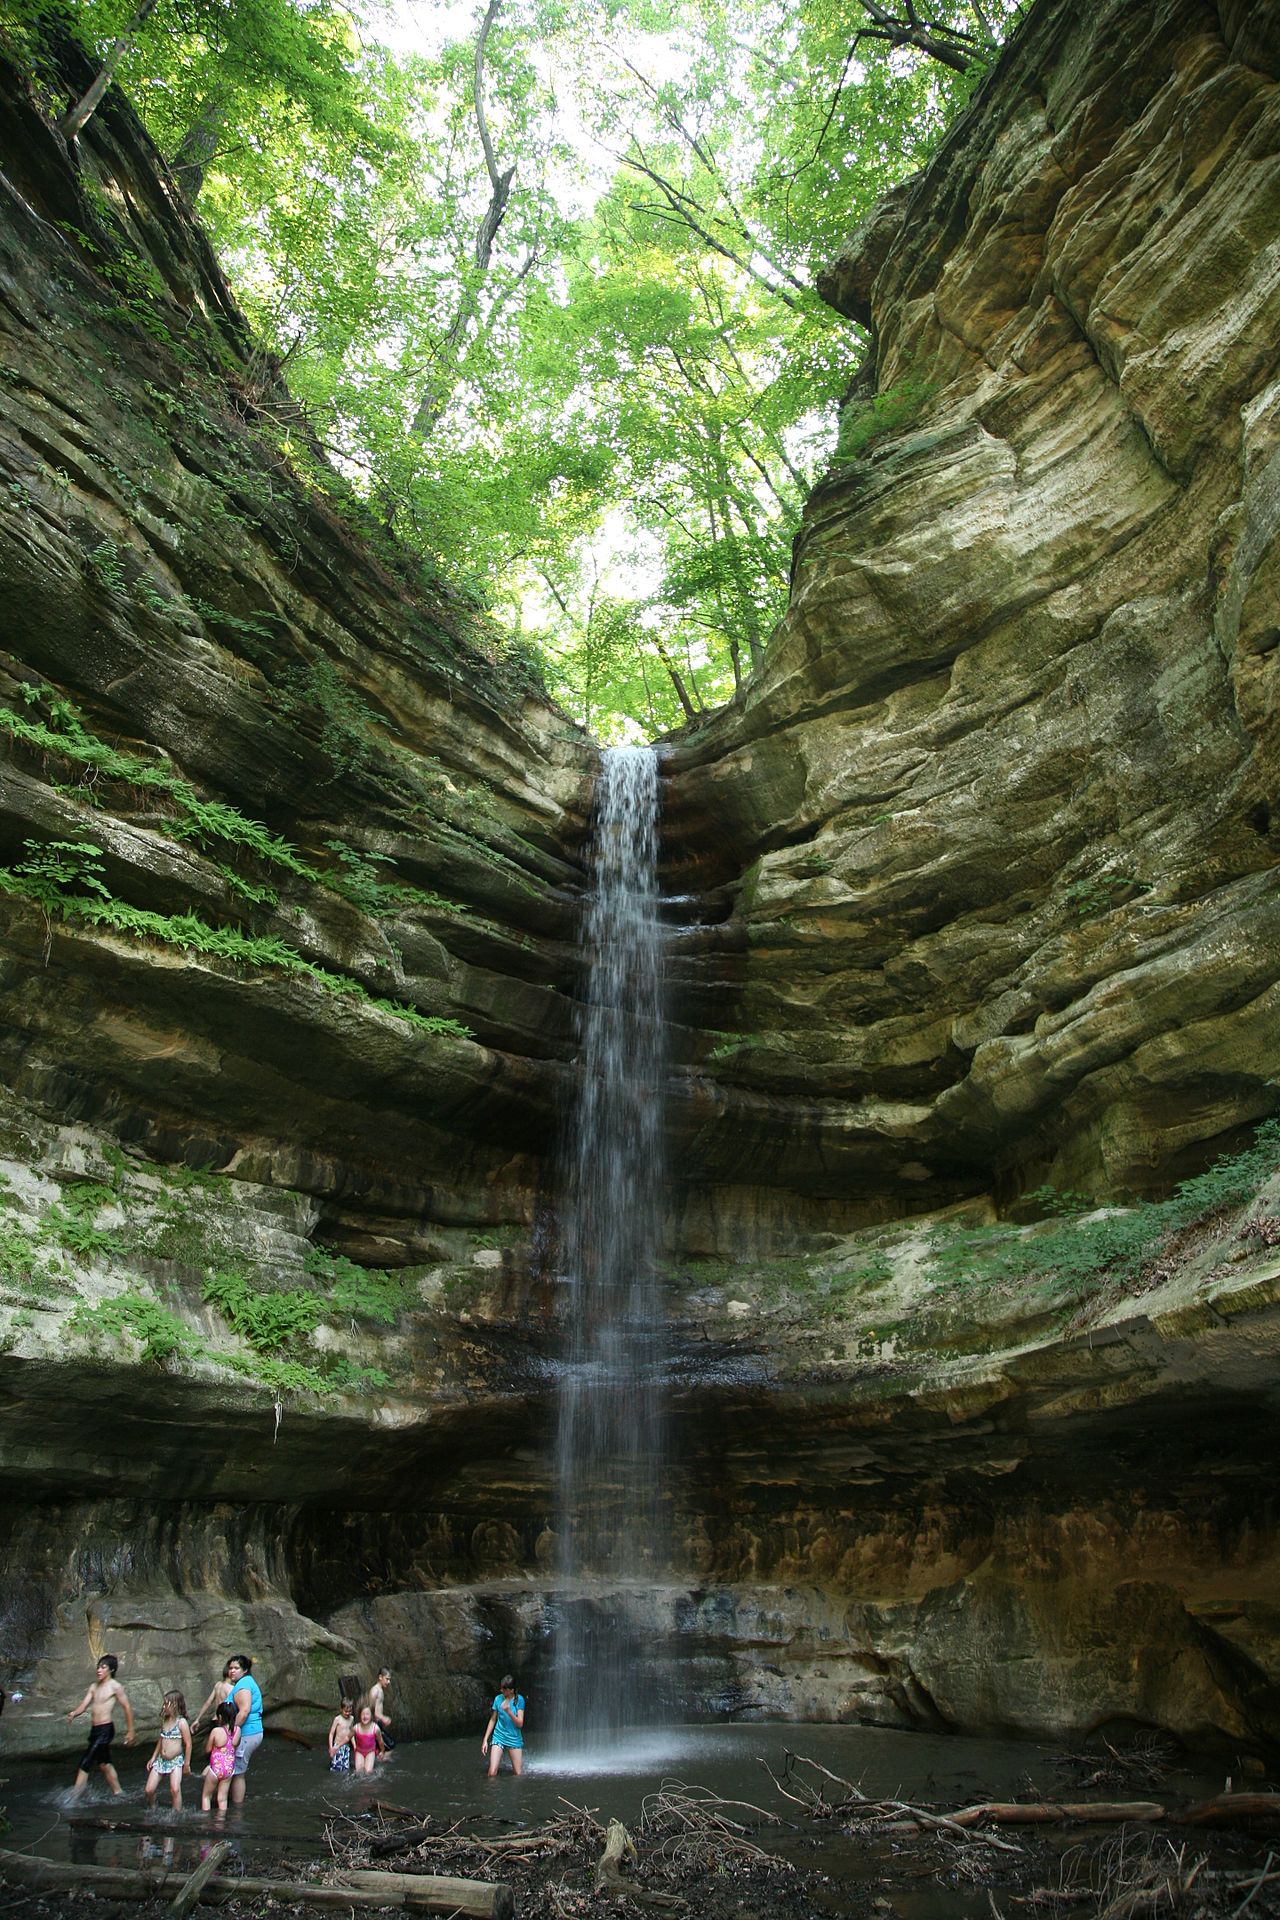 St. Louis Canyon waterfall. (Image Courtesy)